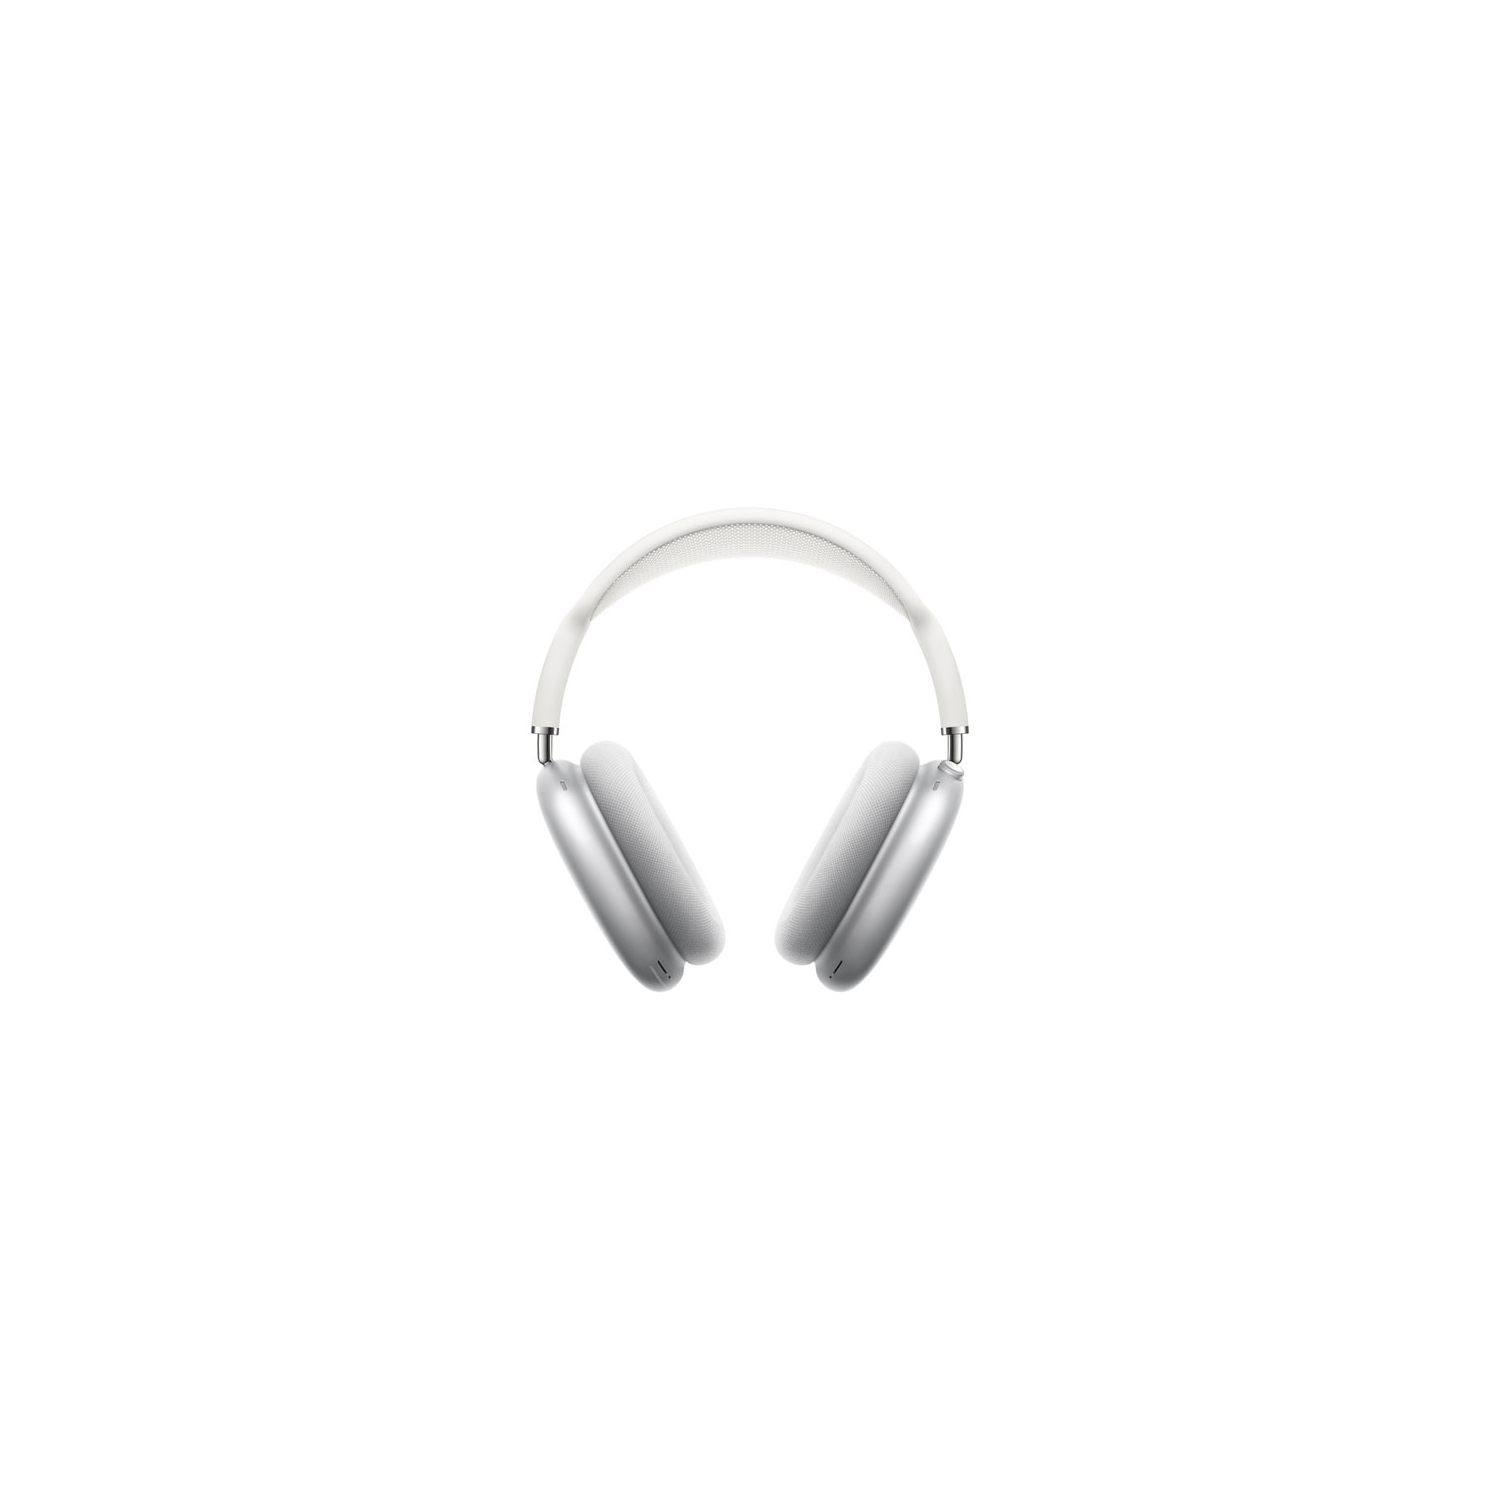 Refurbished (Good) - Apple AirPods Max Over-Ear Noise Cancelling Bluetooth Headphones - Silver